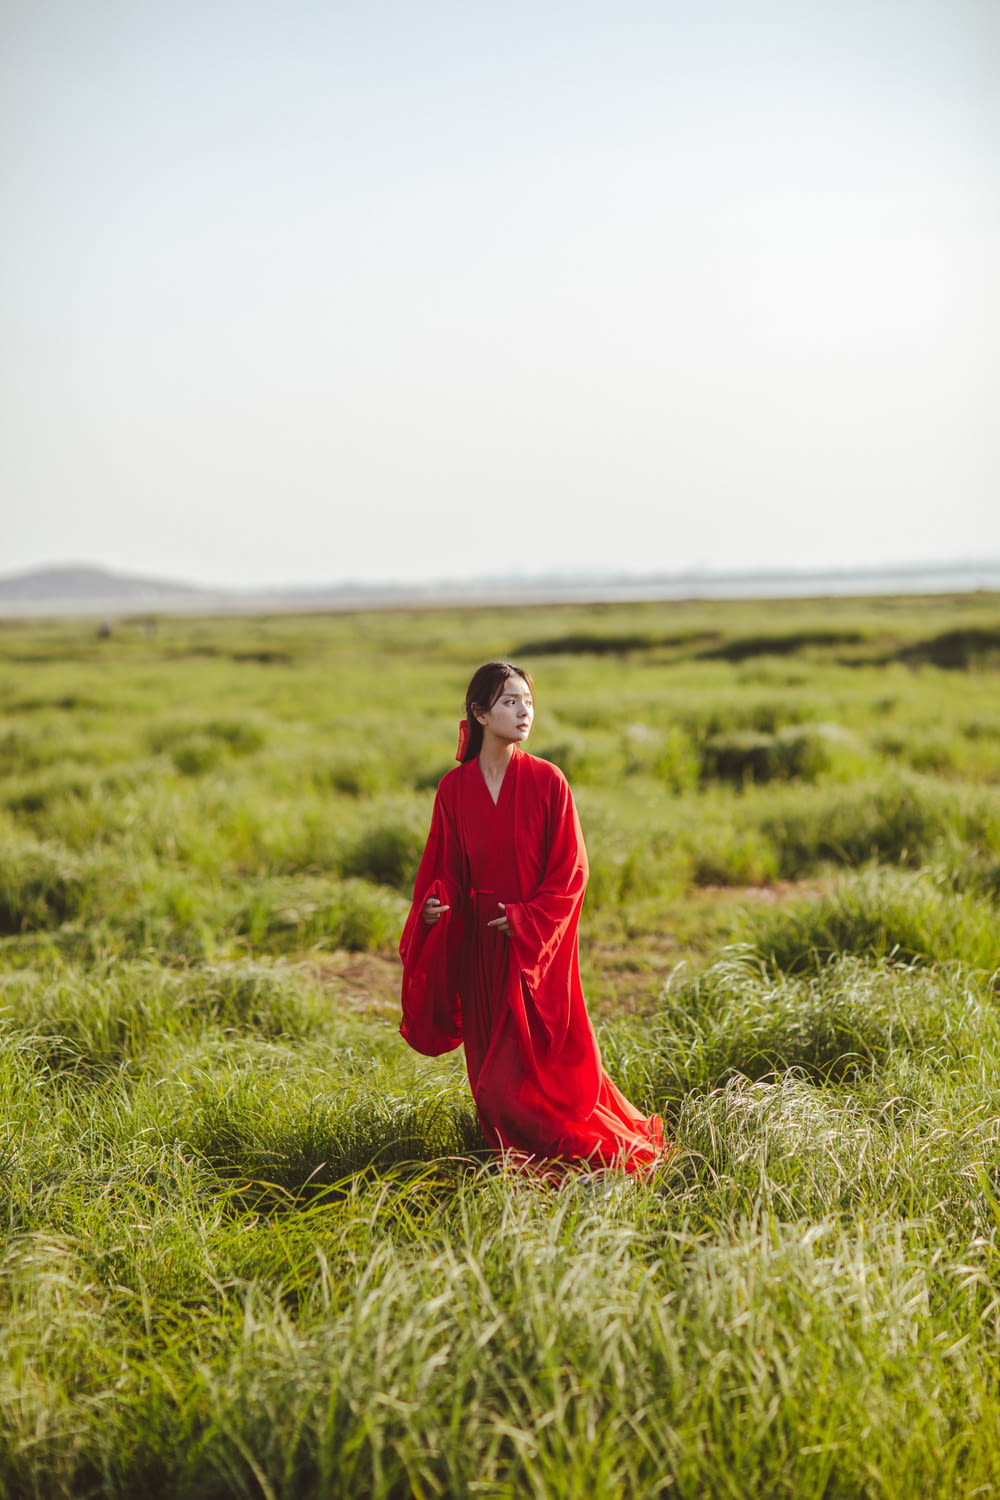 a man in a red dress standing in a field of grass